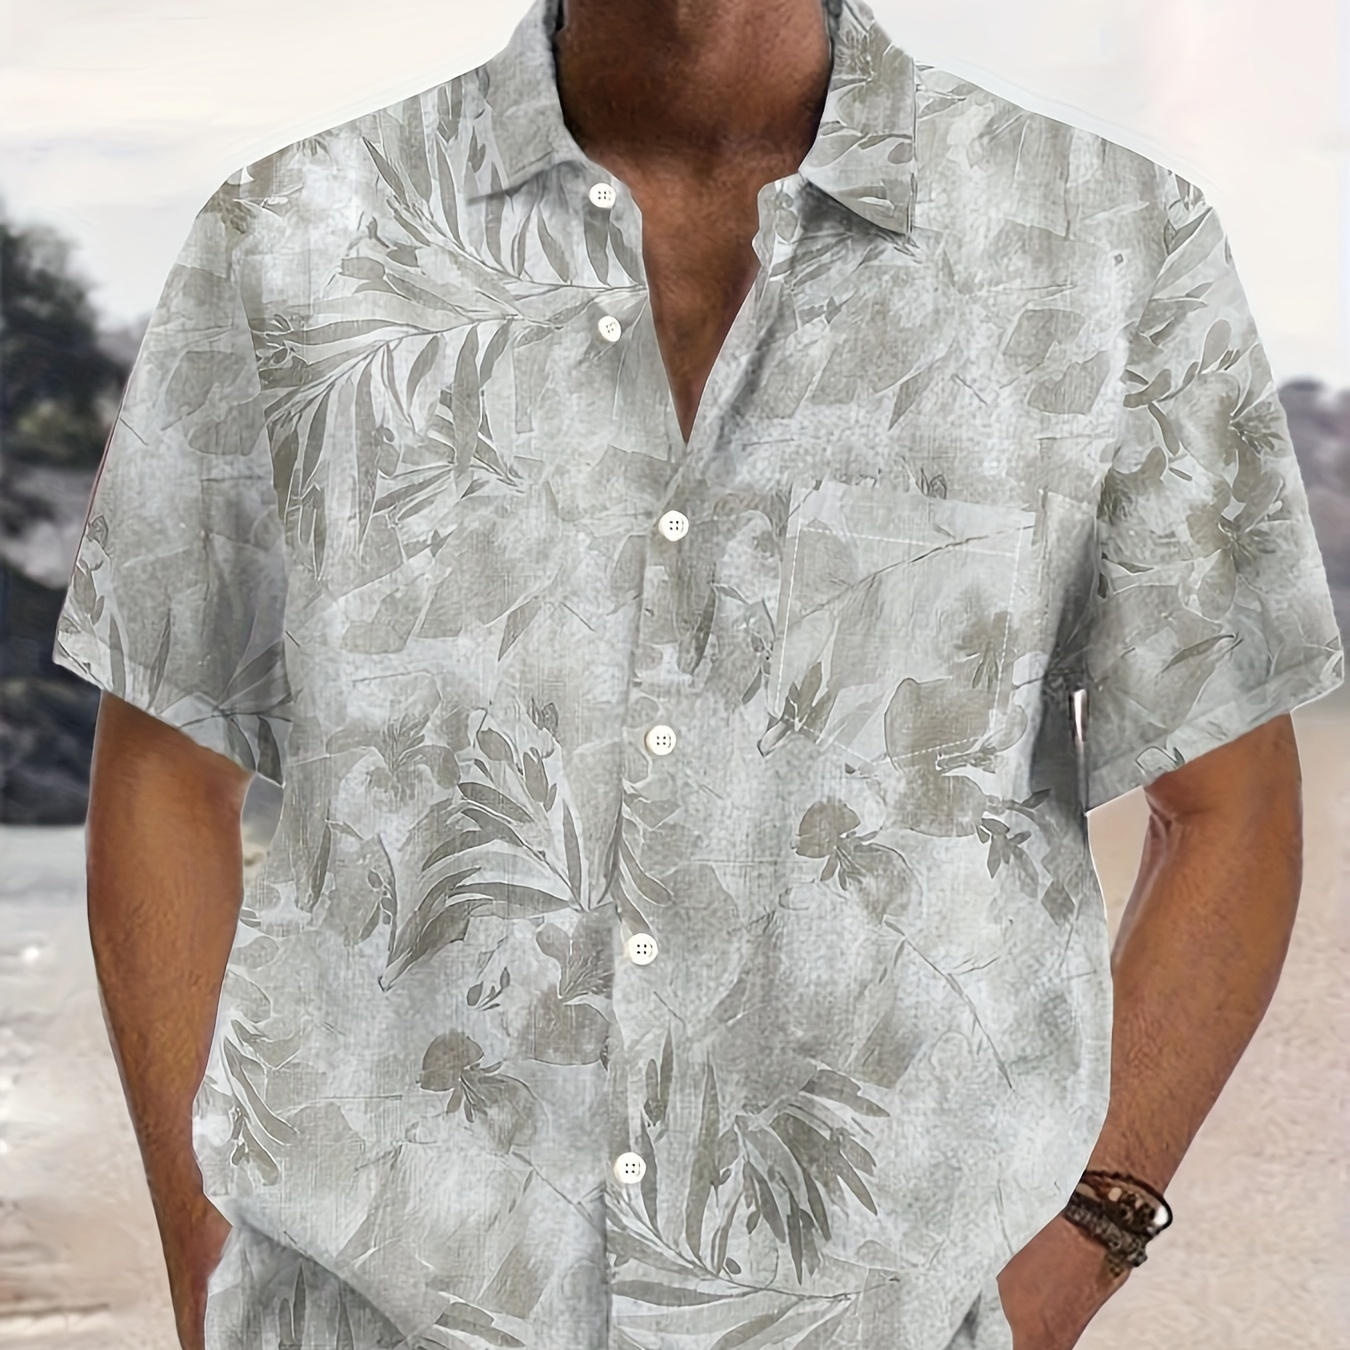 

Plus Size Men's Hawaiian Style Shirt, Floral Plant Graphic Print Short Sleeve Button-down Shirt, Summer Trendy Casual Clothing For Big & Tall Guys